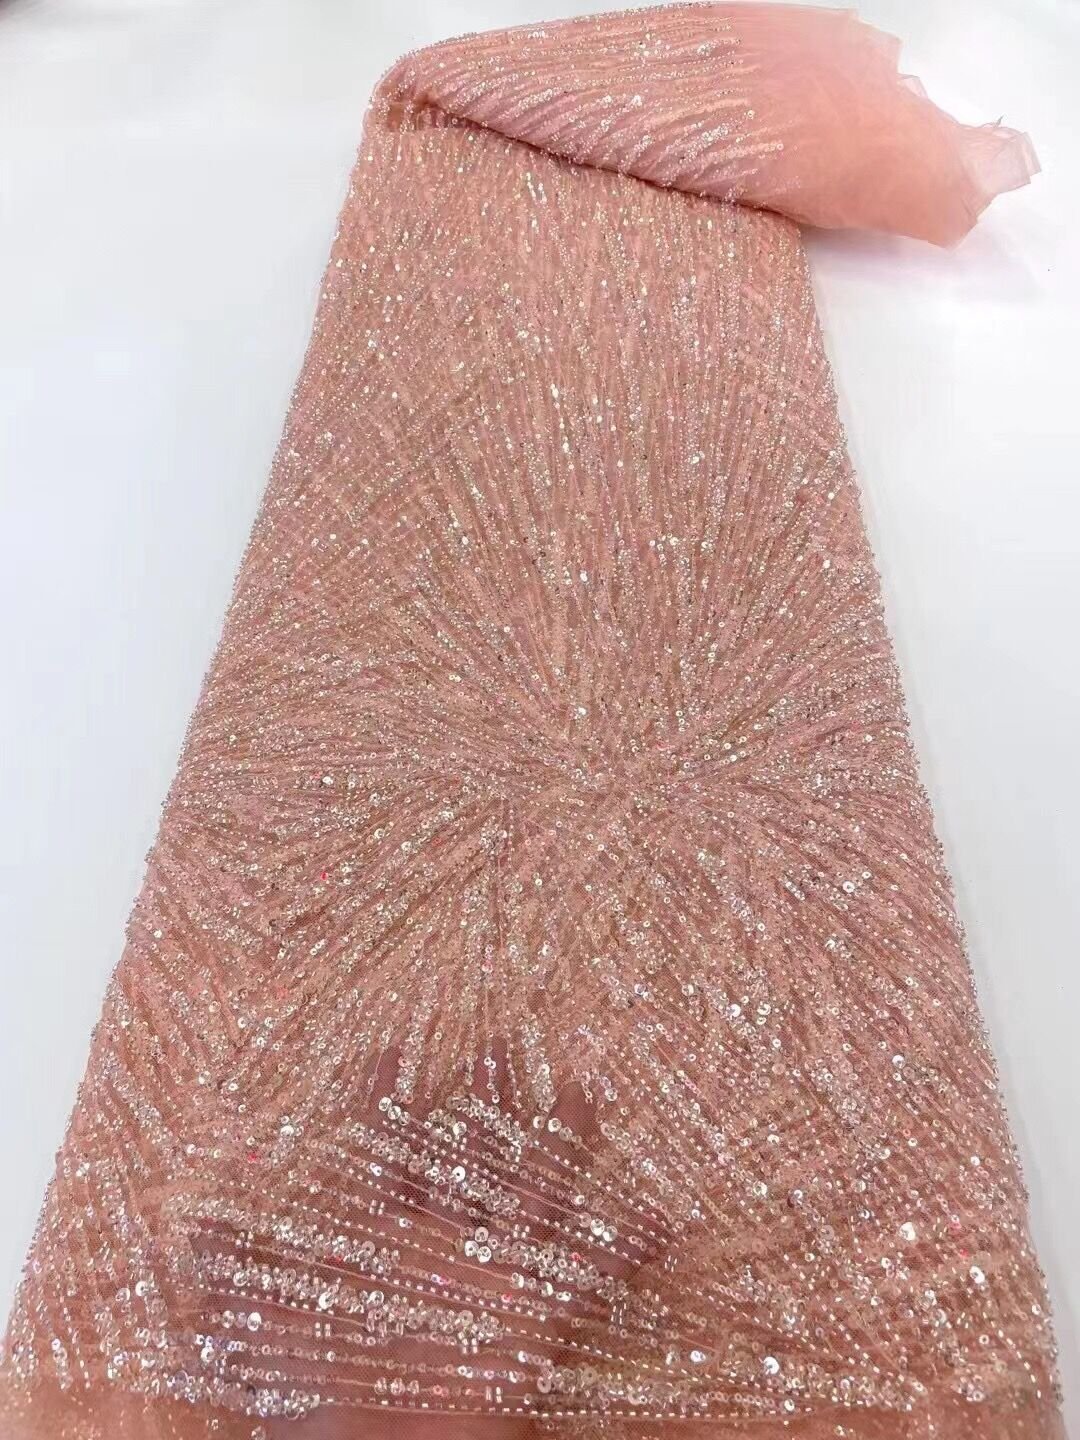 5 YARDS / 13 COLORS / Abstract Starburst Lines Glitter Sequin Beaded Embroidery Tulle Mesh Lace Fabric - Classic Modern Fabrics